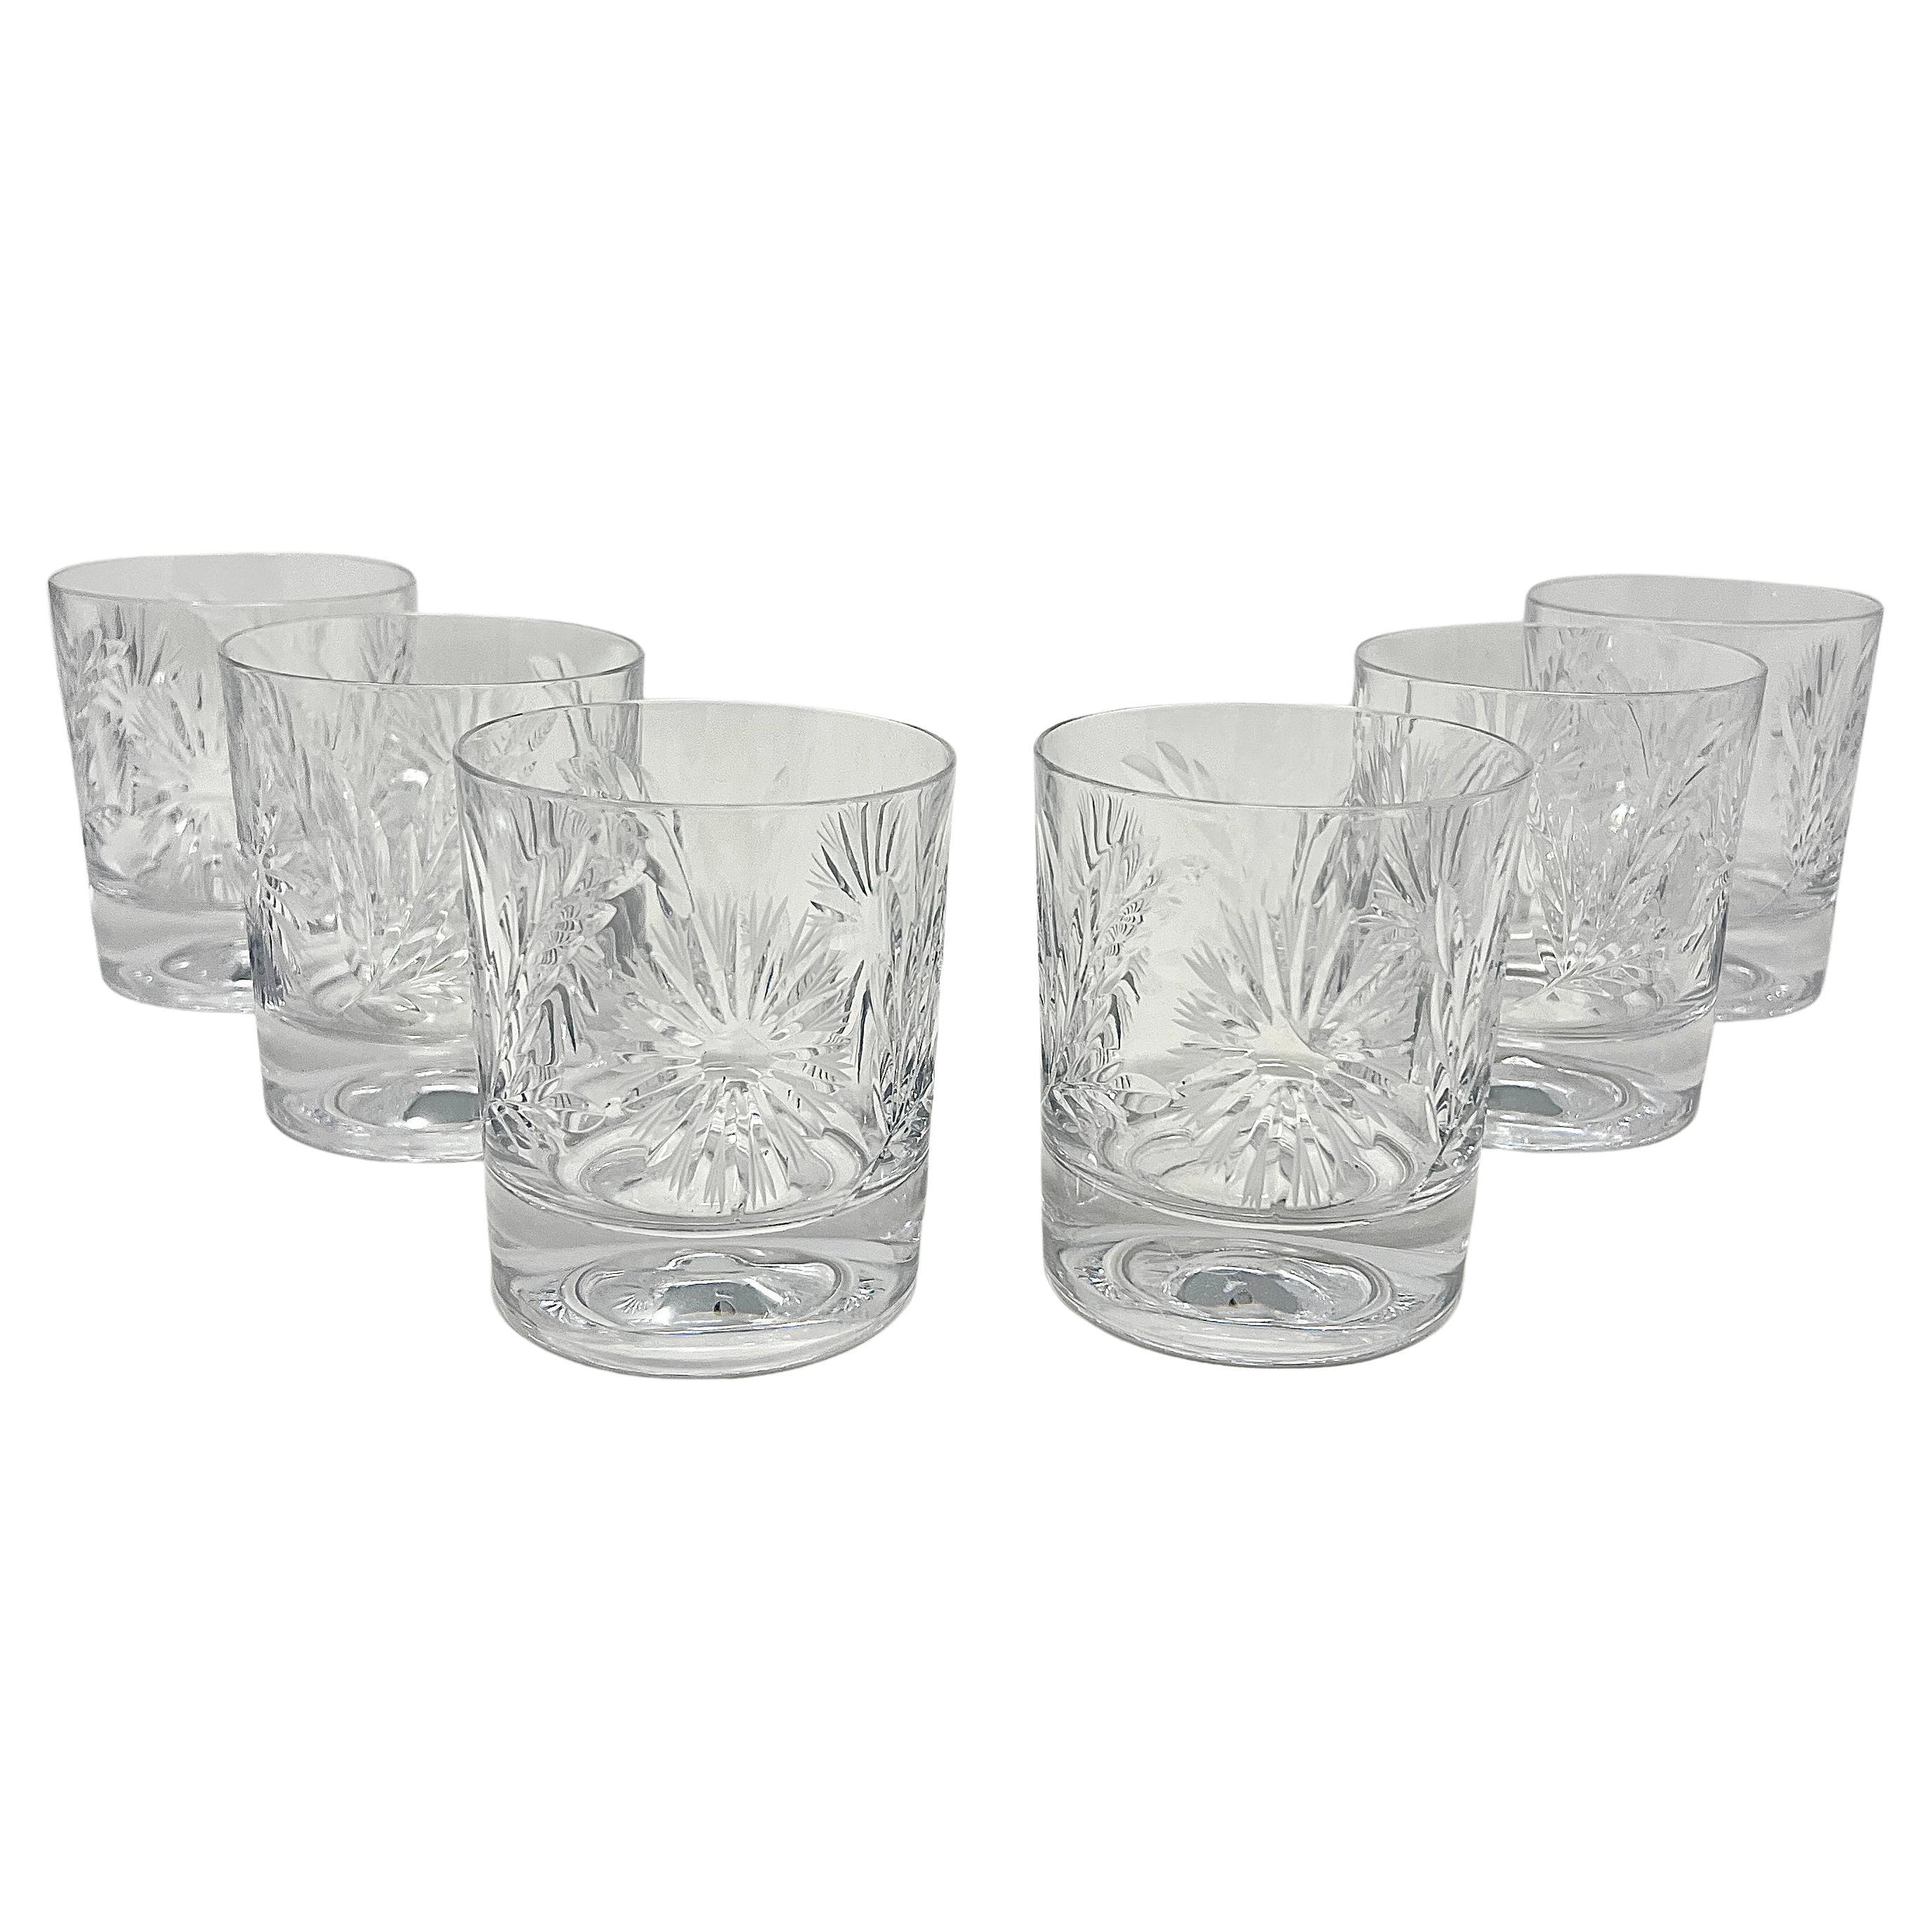 Set of 6 Estate American Cut Crystal Double Old Fashioned Glasses.